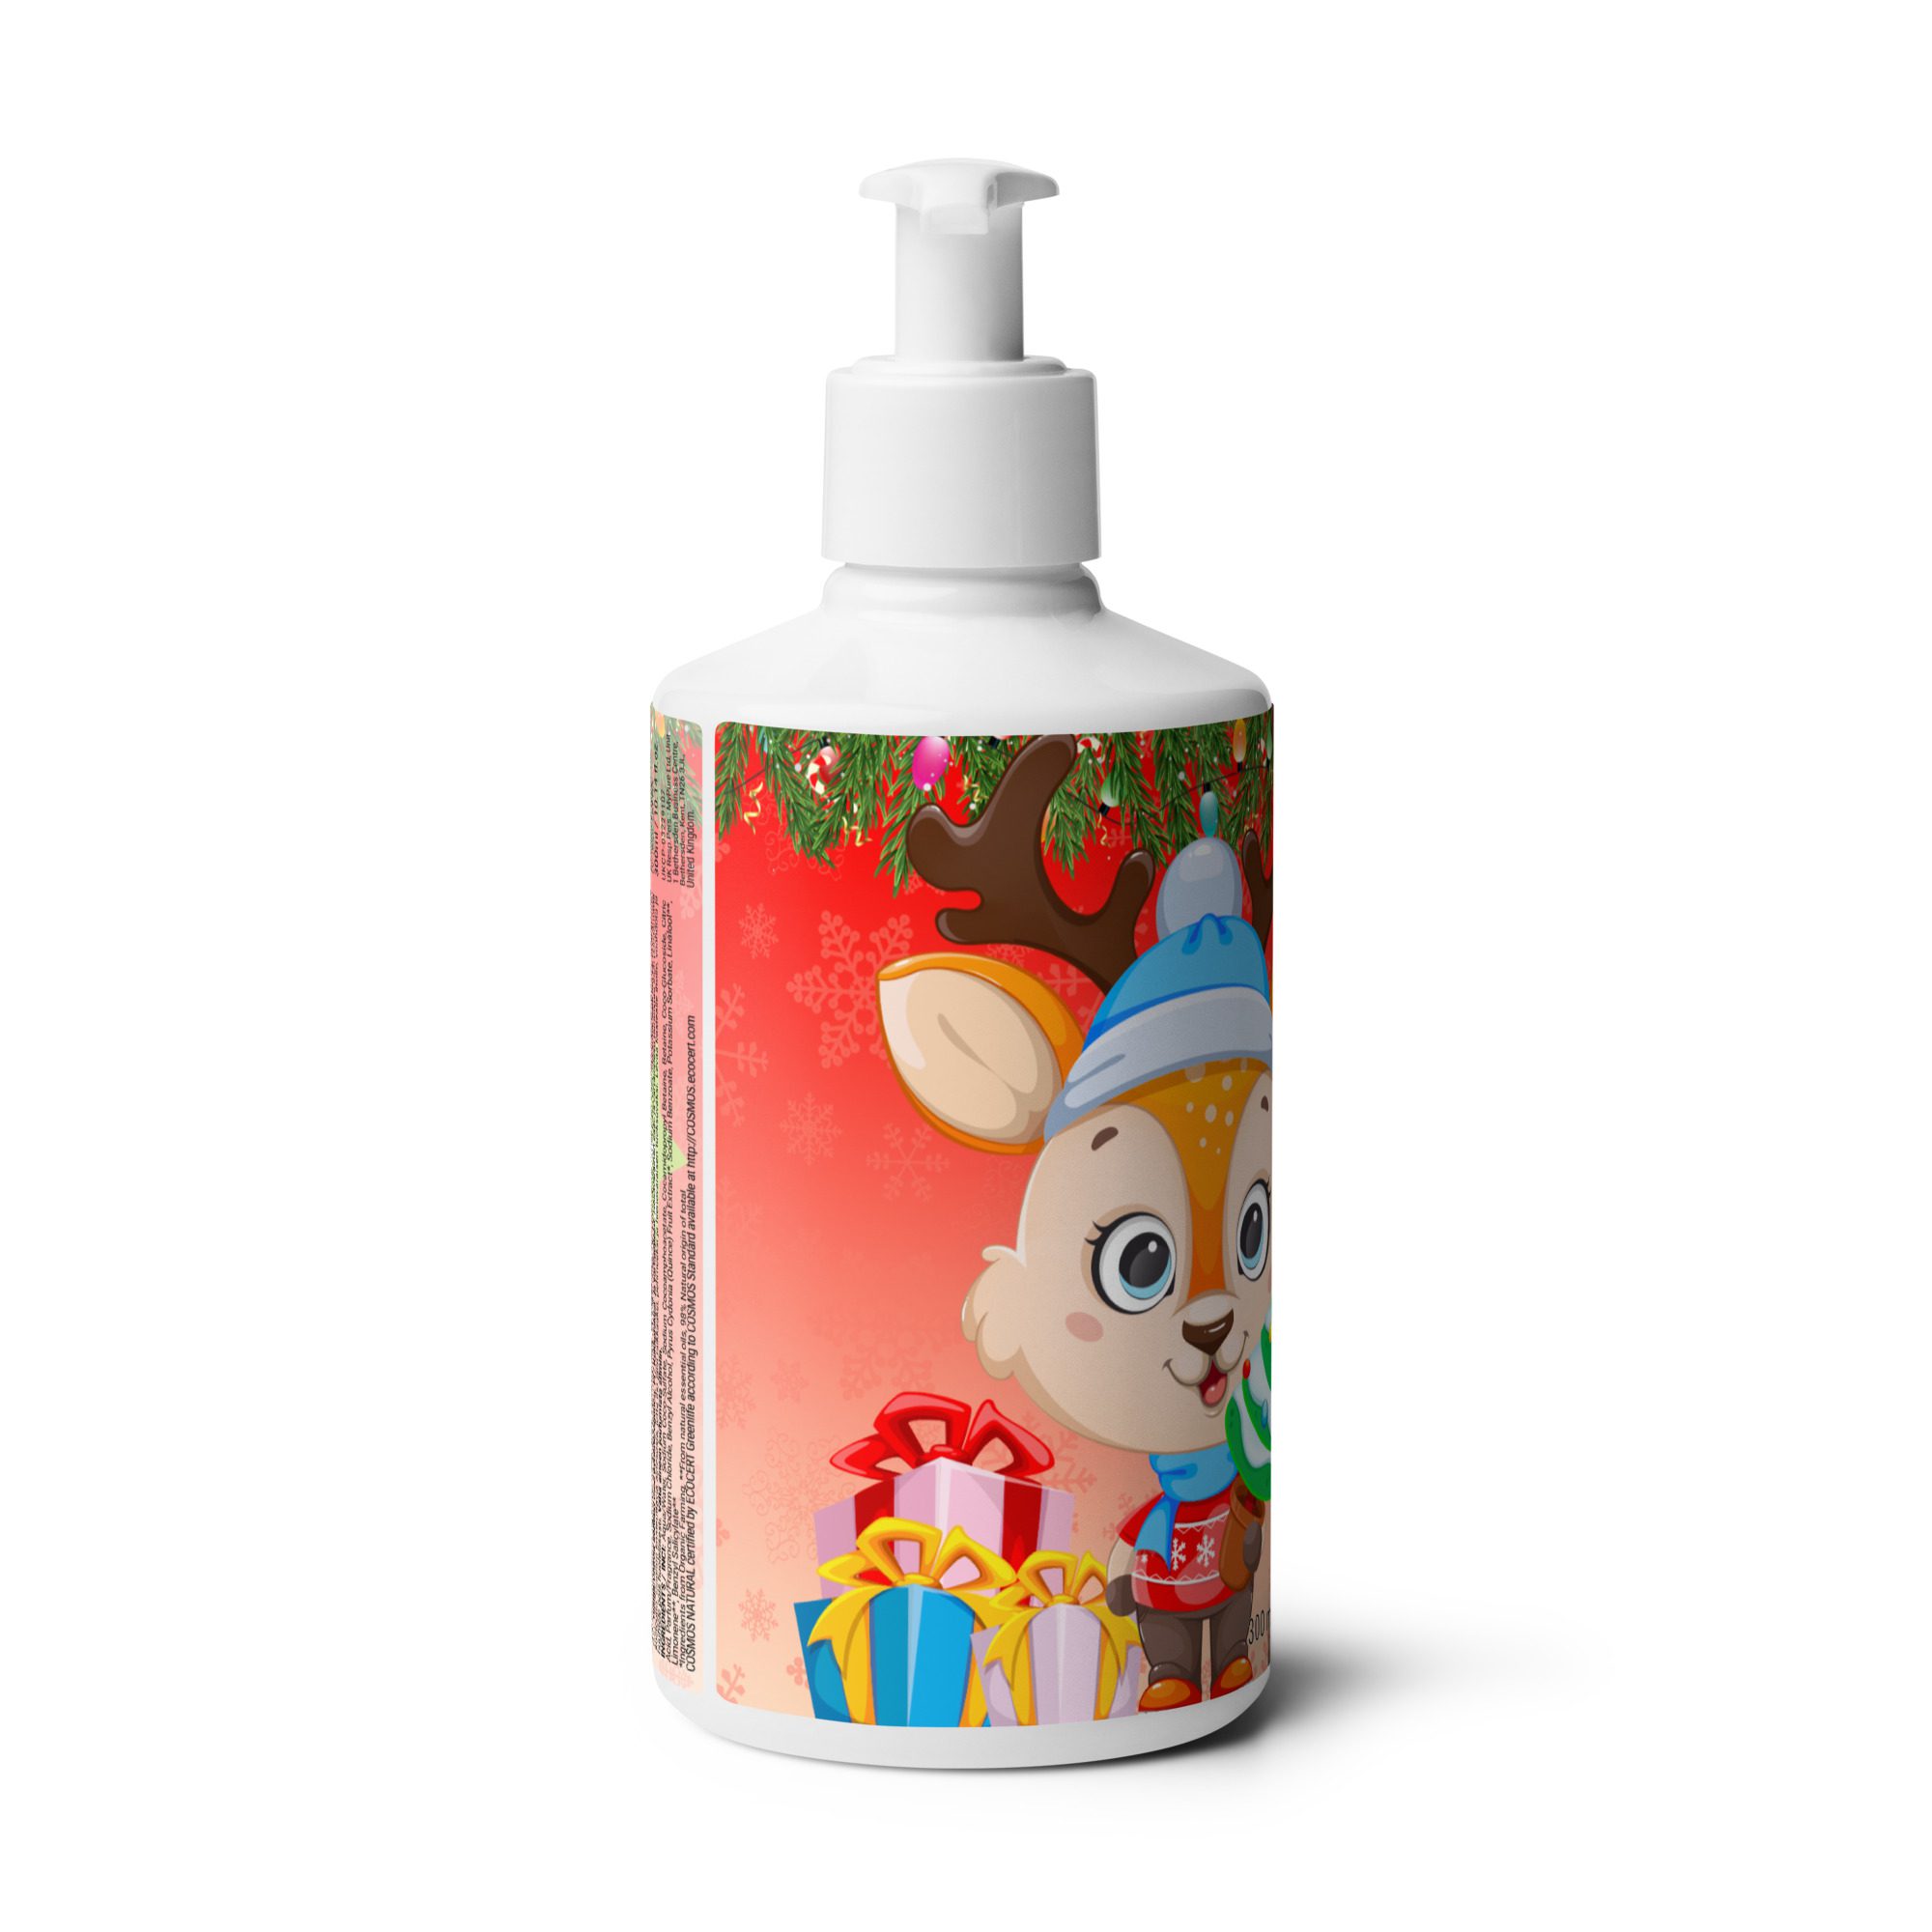 floral hand body wash white left 655d0cf4a7a72